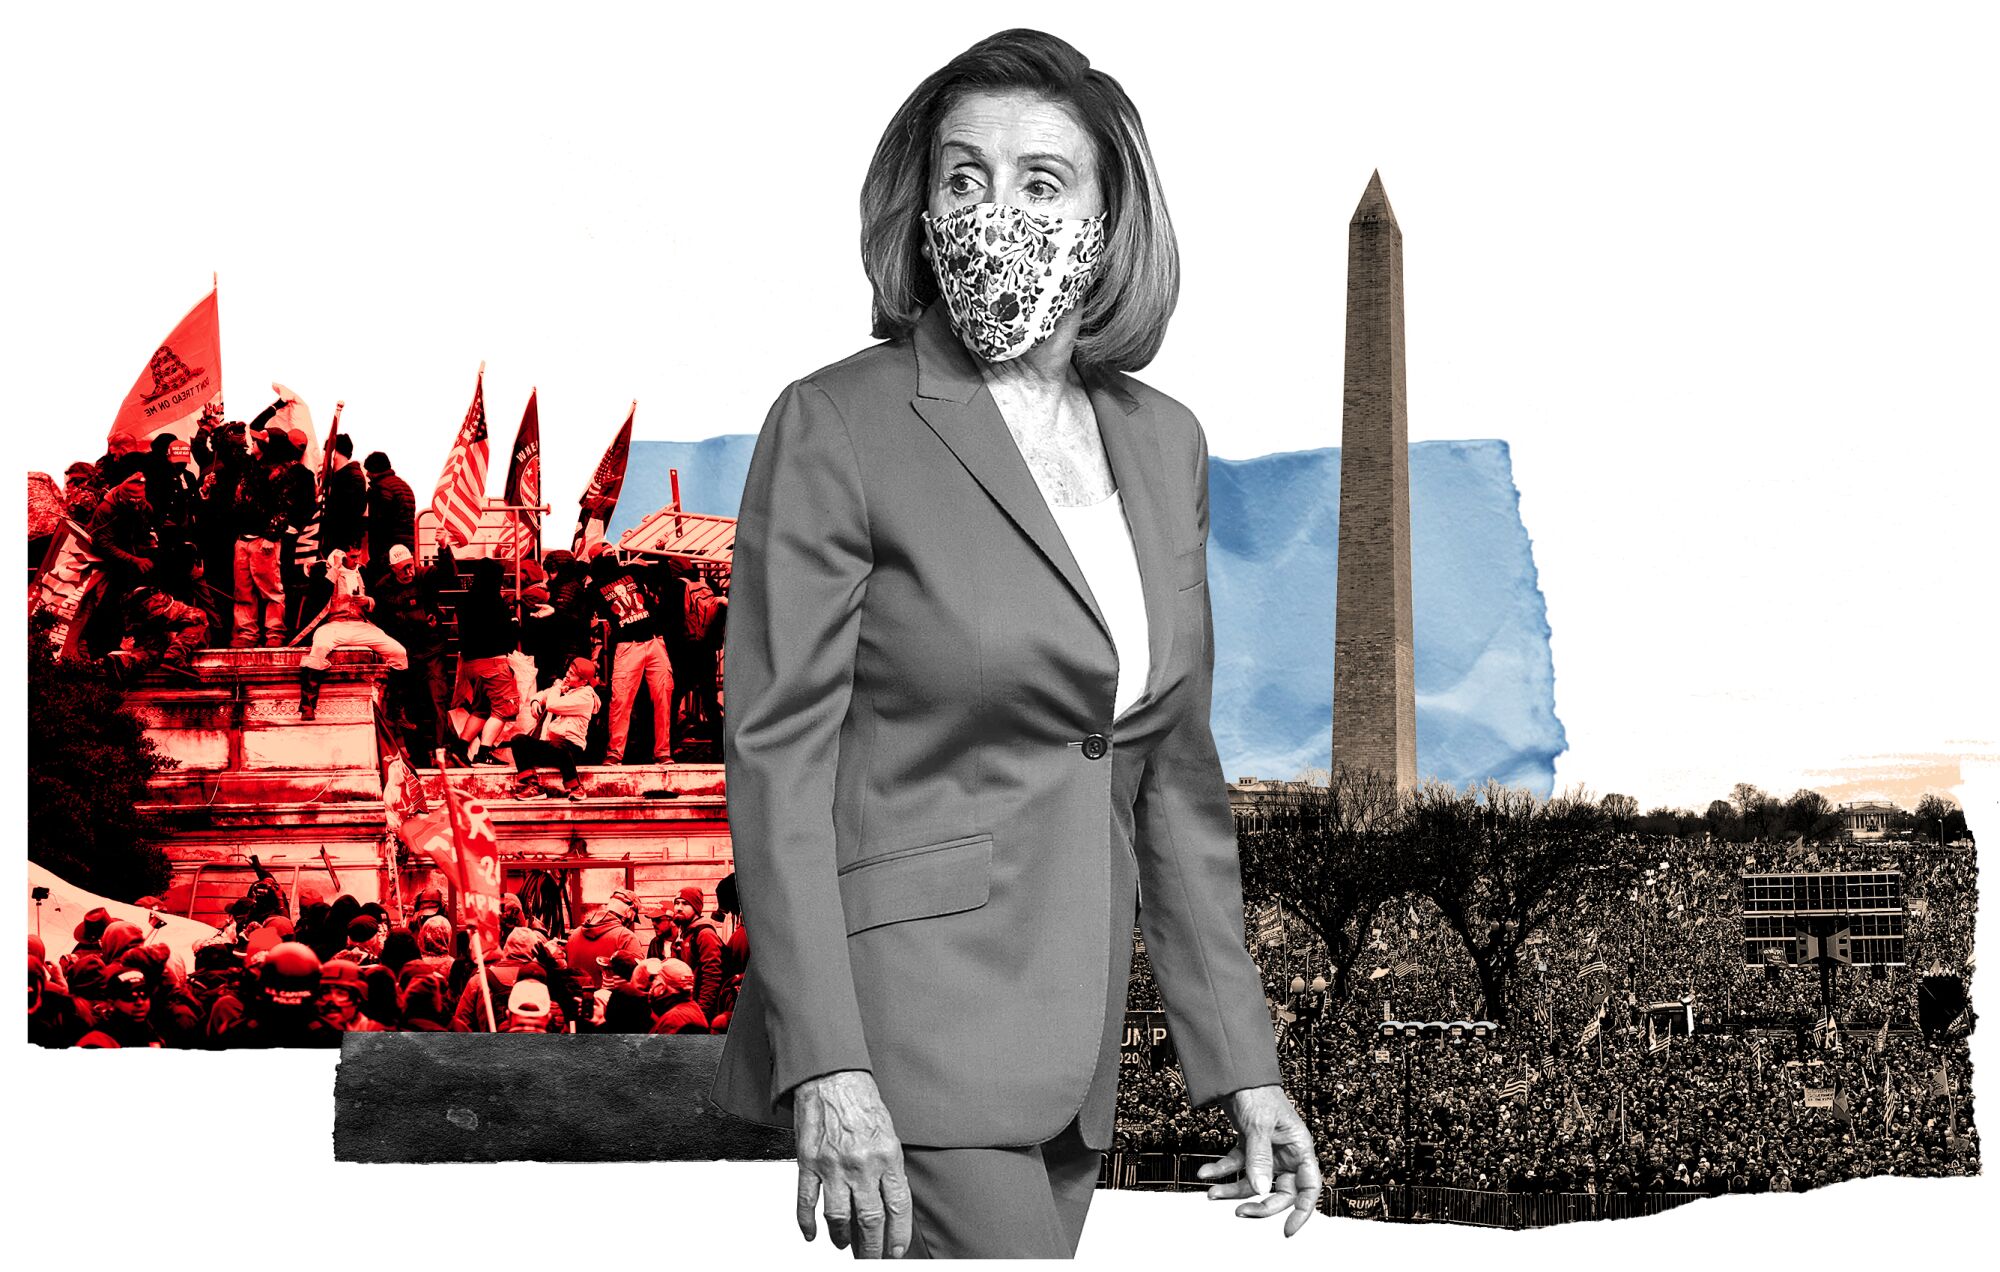 Photo collage illustration of Nancy Pelosi and insurrectionists on Jan. 6th.